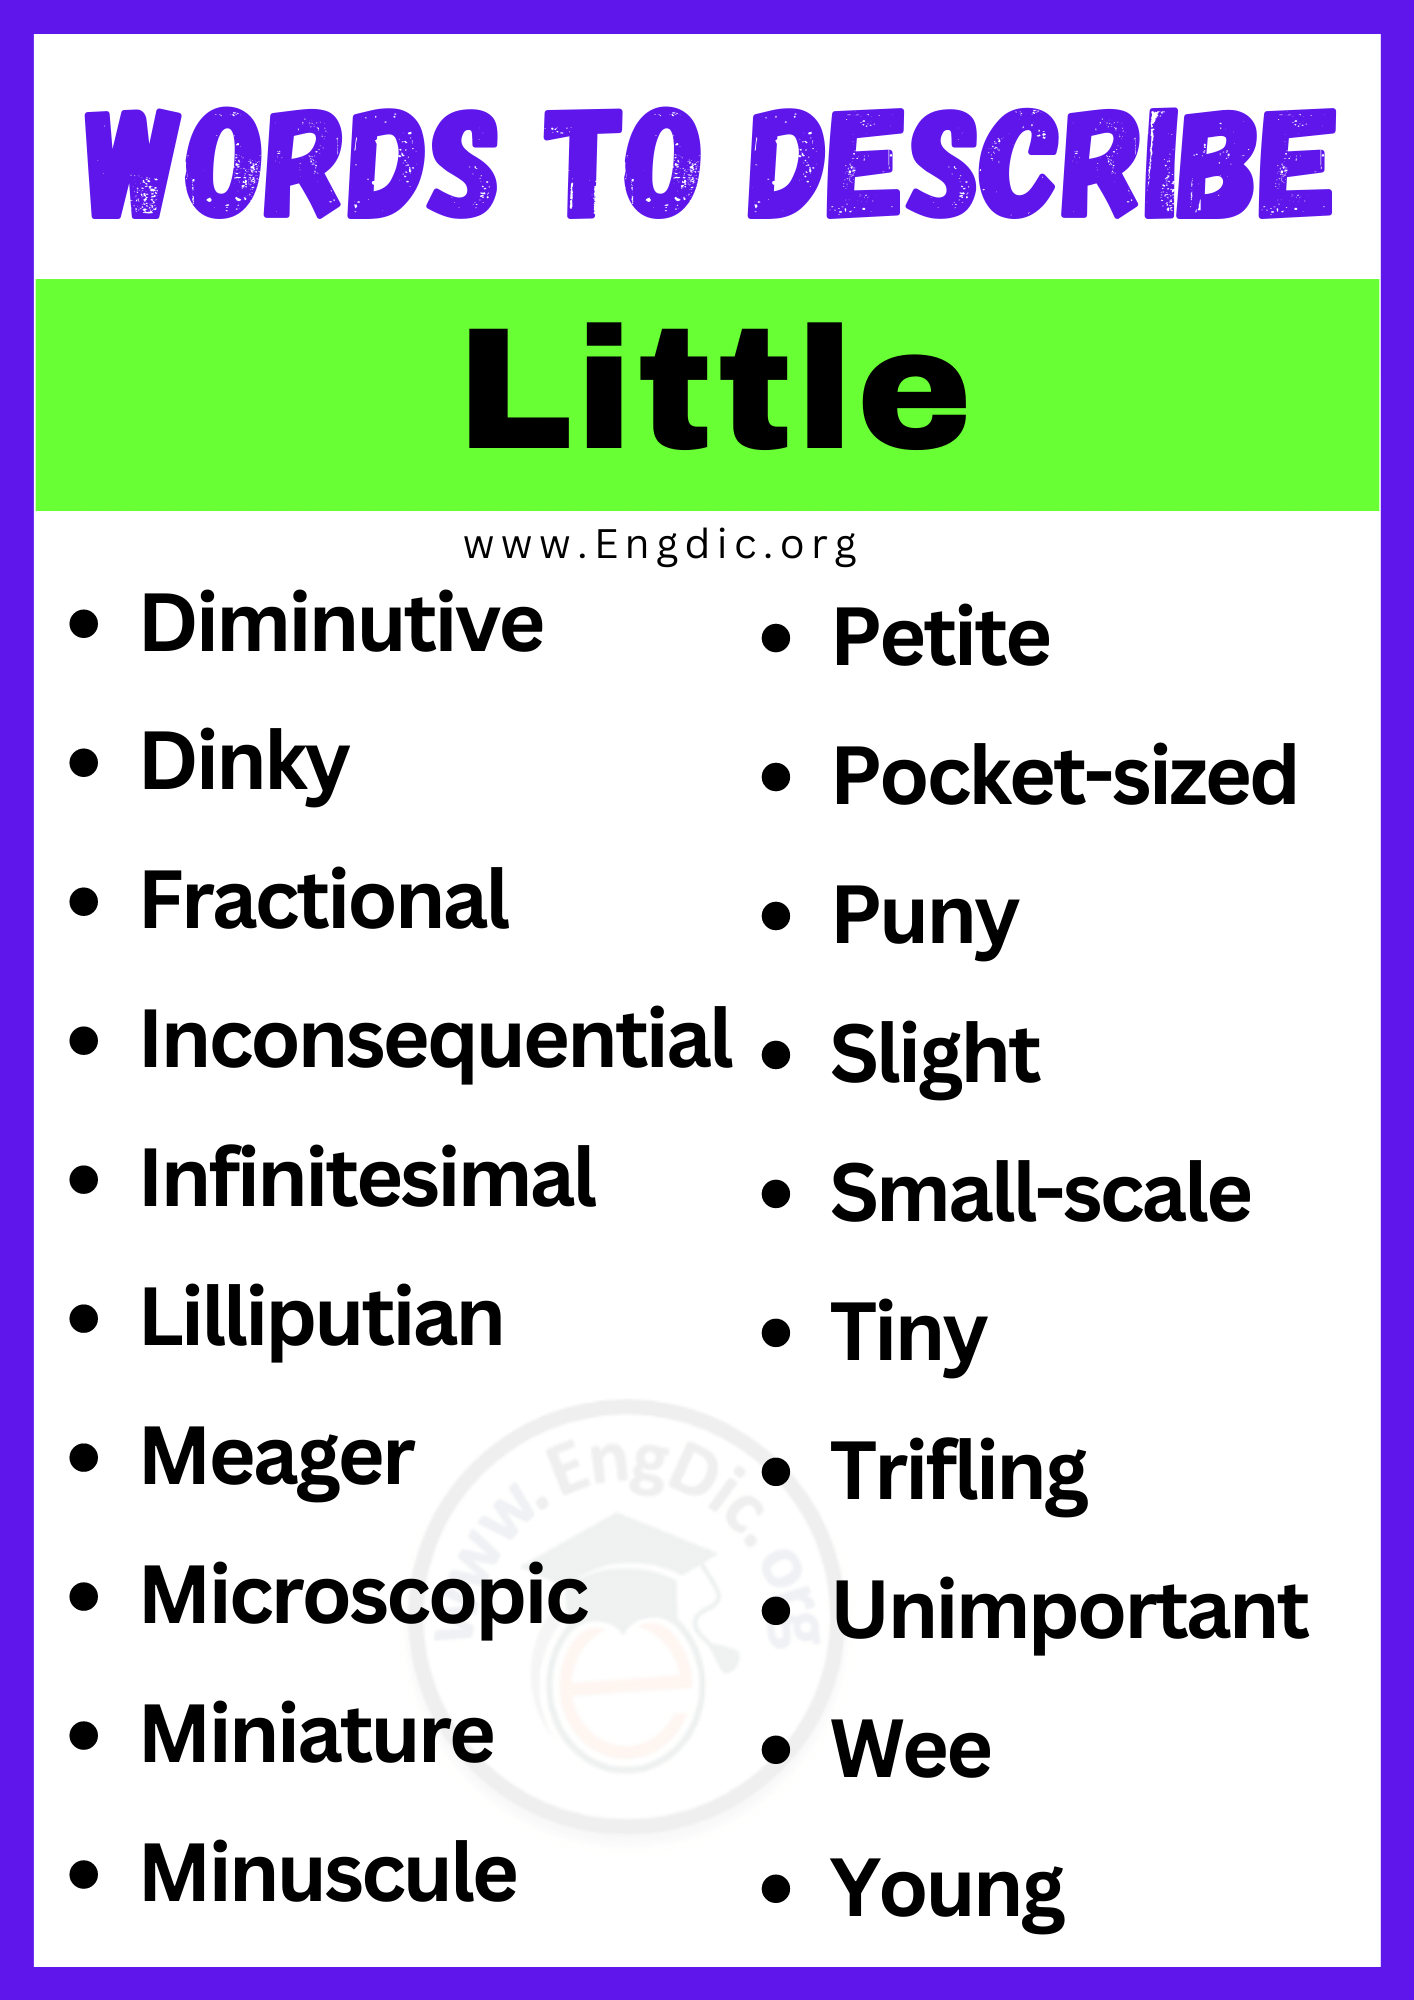 Words to Describe Little